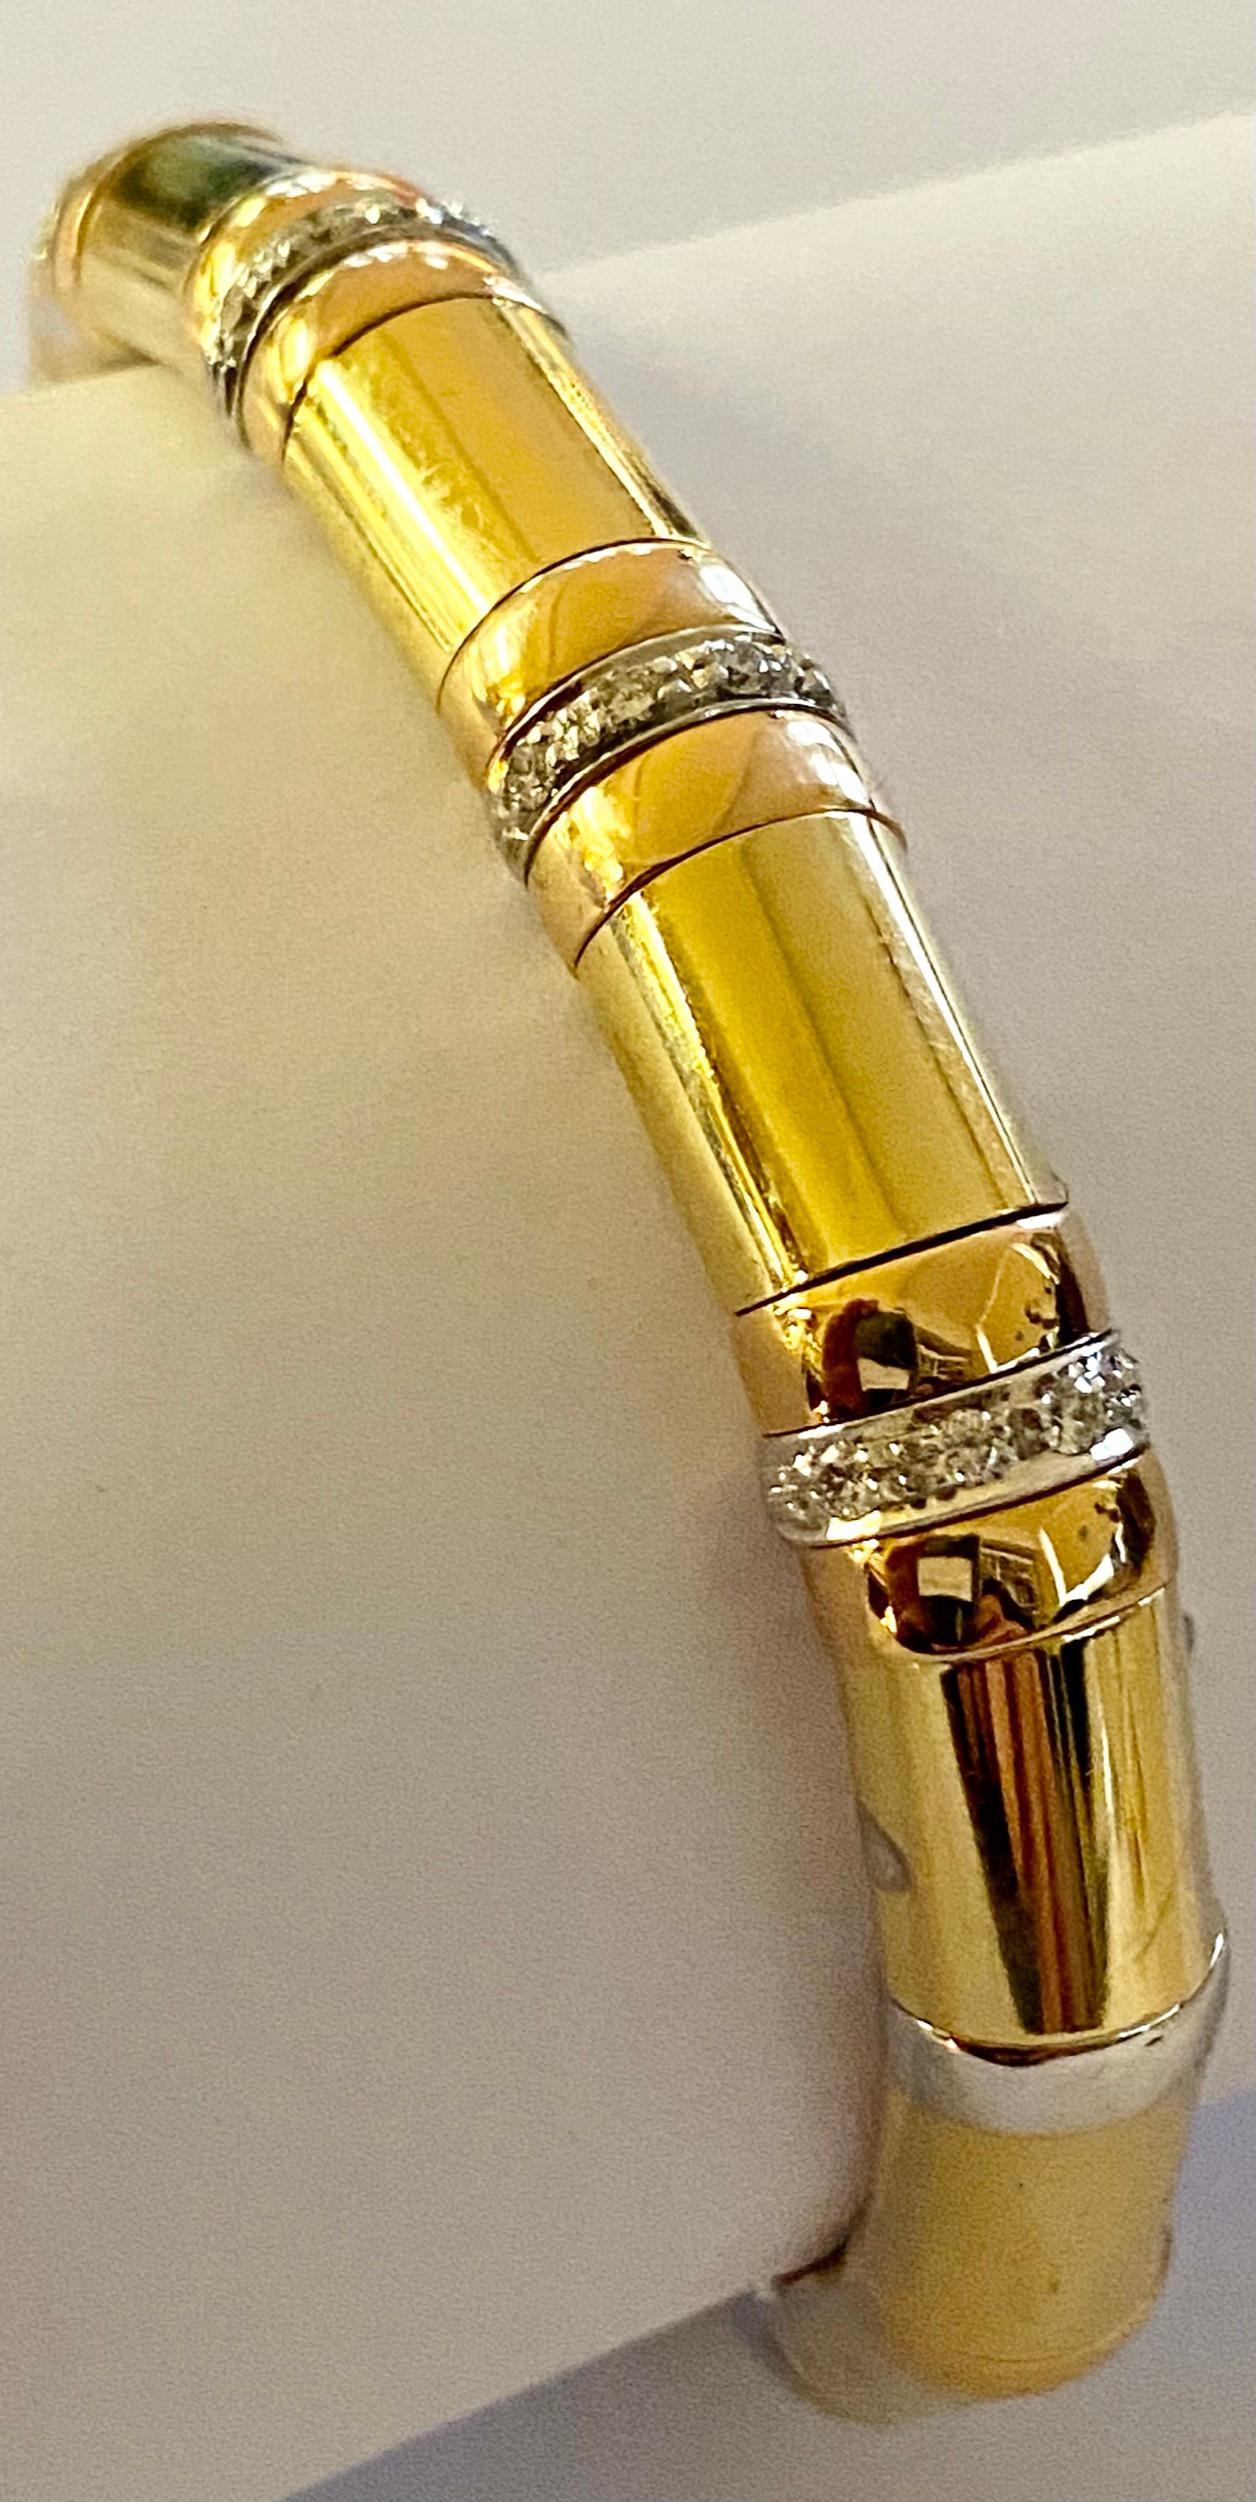 Brilliant Cut 18K, Yellow/Red/White Gold Rigid Bracelet with a Silver Core, Signed Cesari 1995